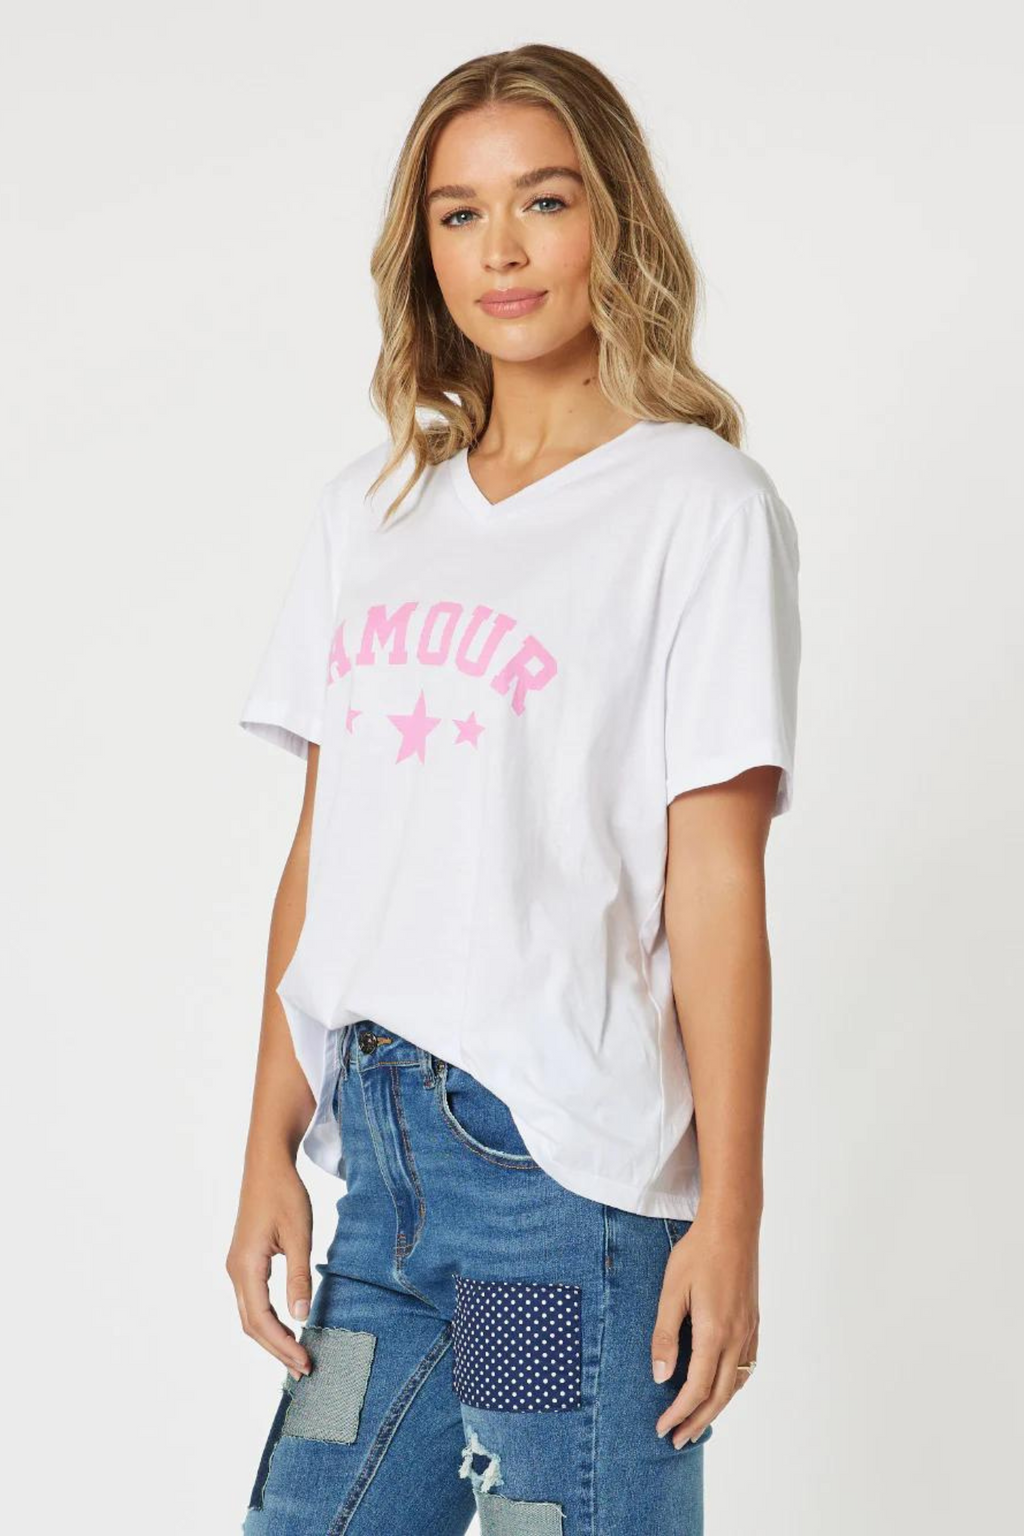 AMOUR T-SHIRT - Pink